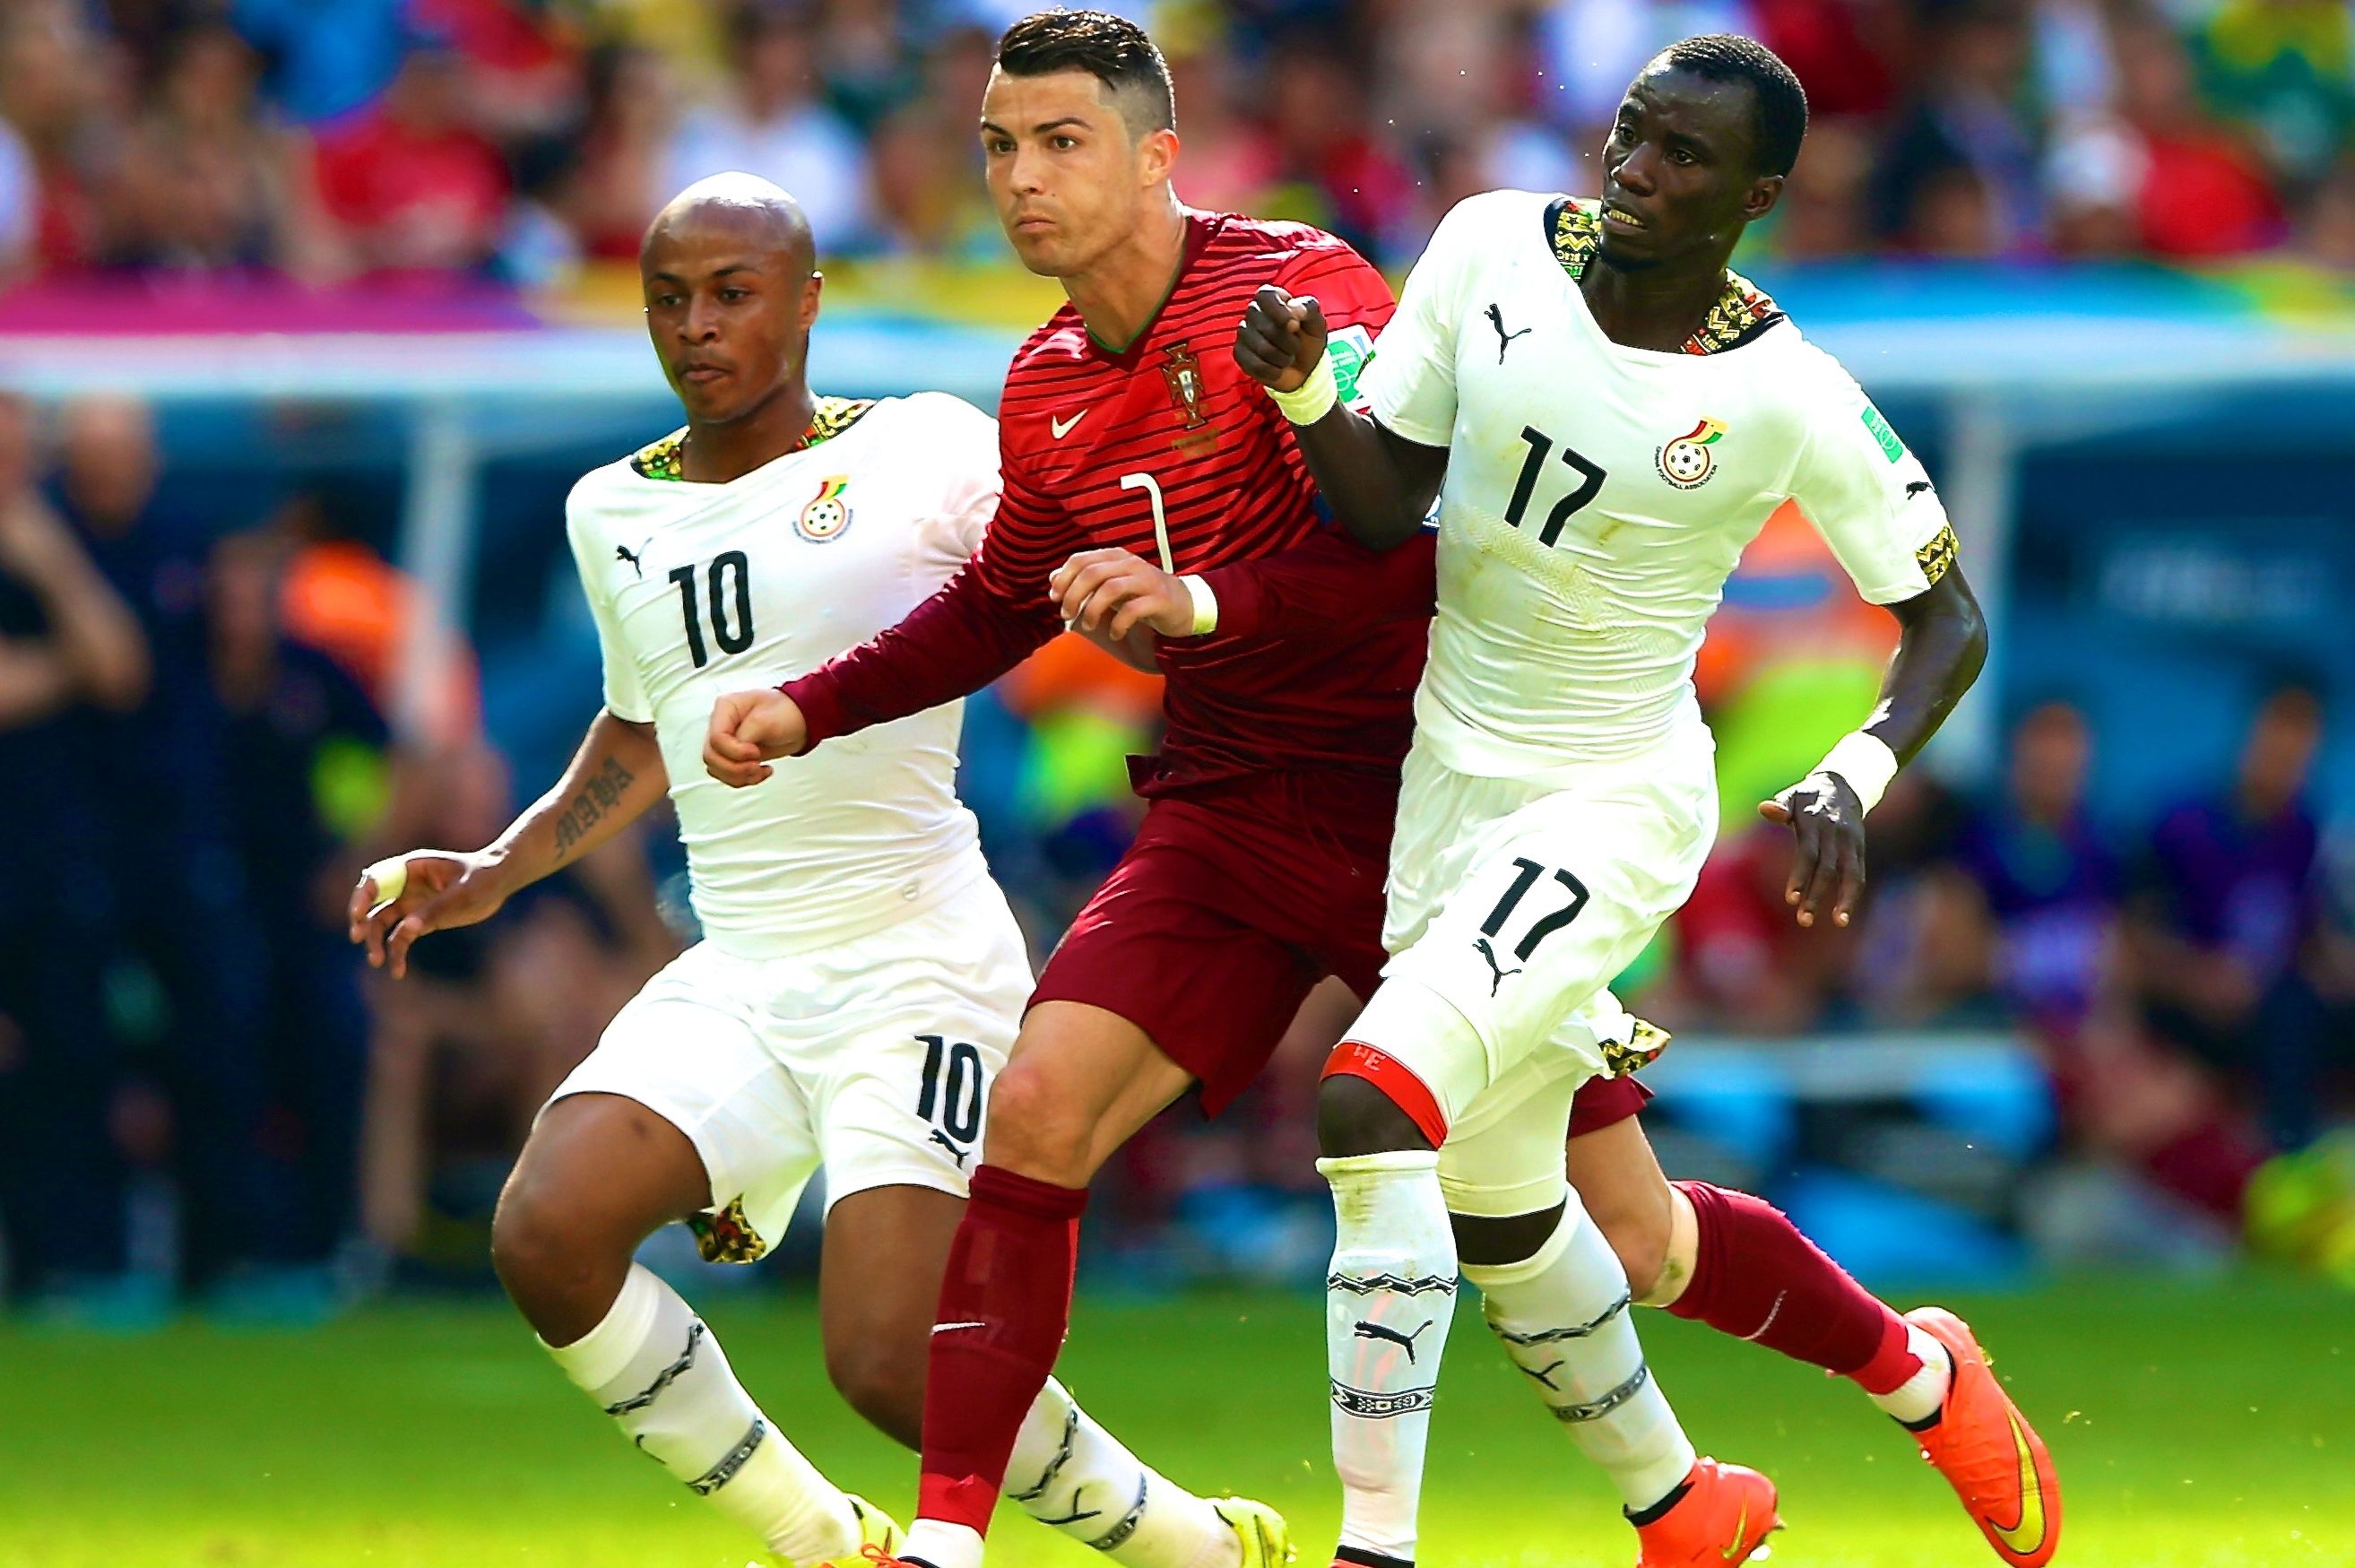 Portugal vs. Ghana today at 16:00 GMT: Facts about the teams at the 2022 FIFA World Cup